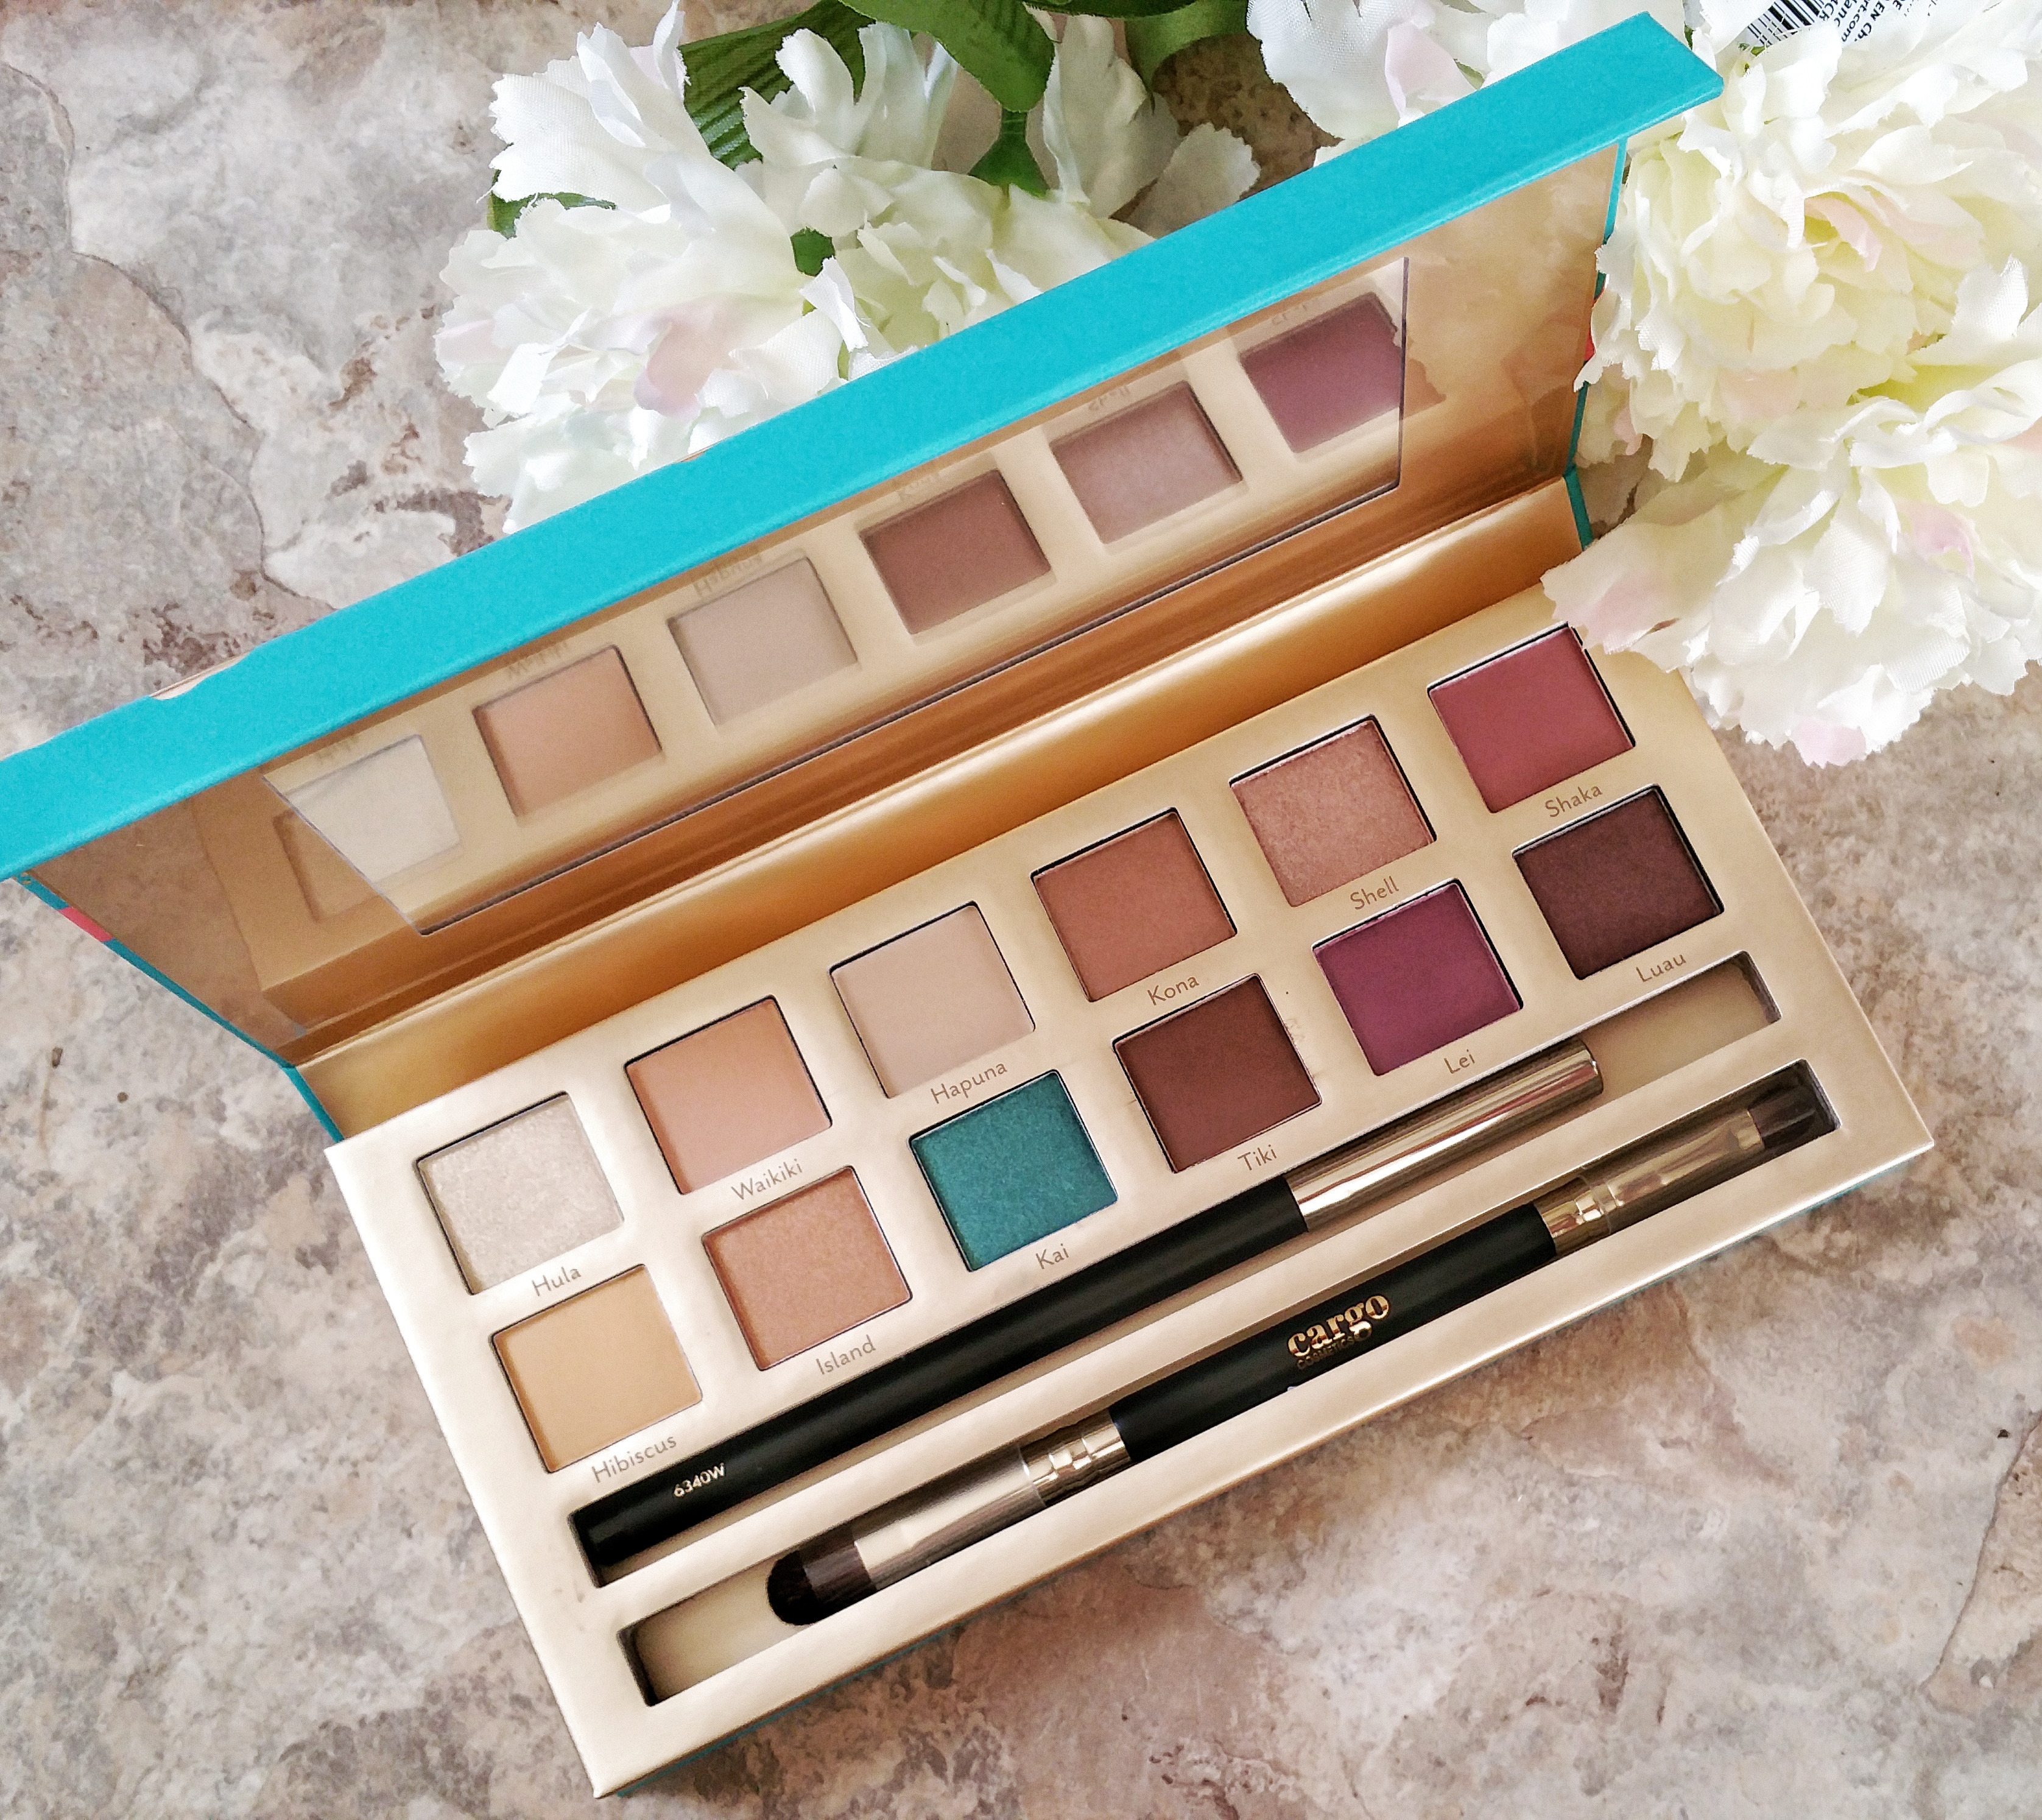 Cargo Cosmetics, You had me at hello, limited edition, eye shadow palette, cargo, anuhea jenkins, makeup, beauty, review, swatches, hawaii, maui, eyeliner, eye shadow brush, eye shadow swatches, gorgeous, beautiful